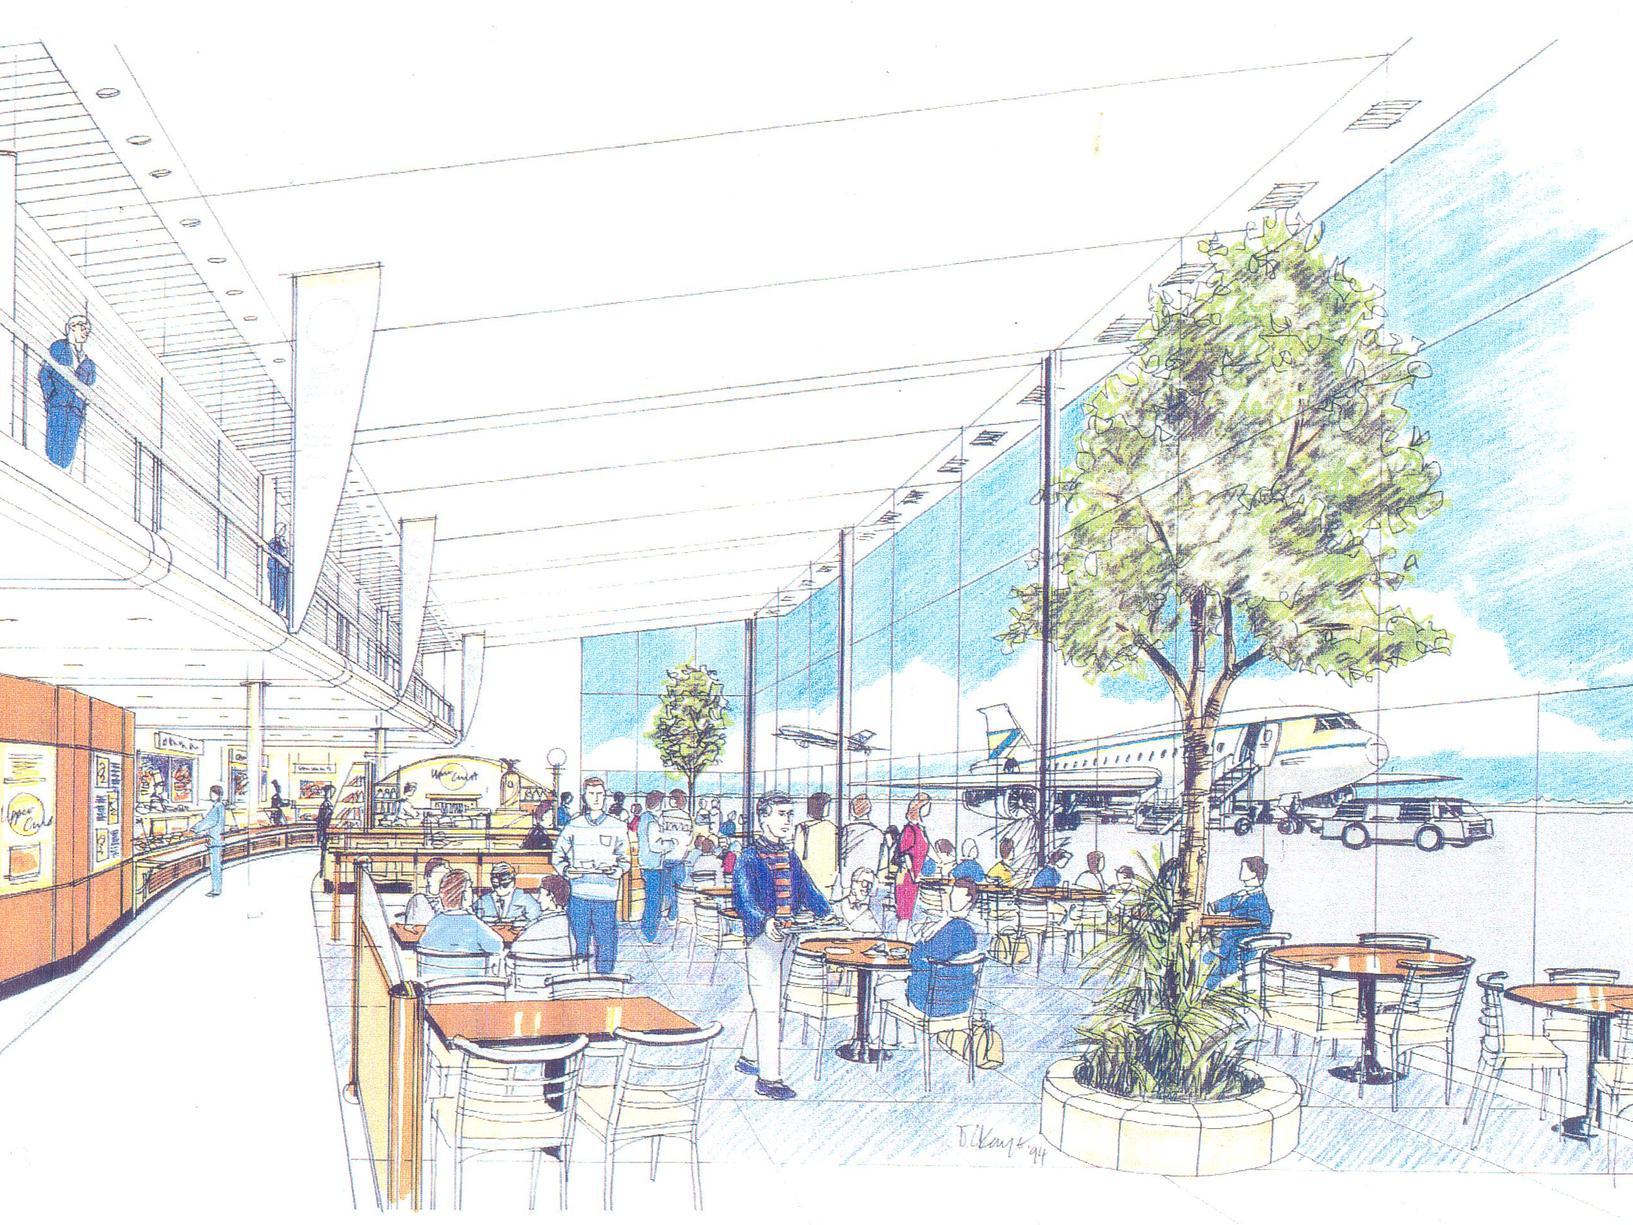 An artist's impression of plans for the free-flow restaurant and upper crust kiosk at Leeds Bradford.